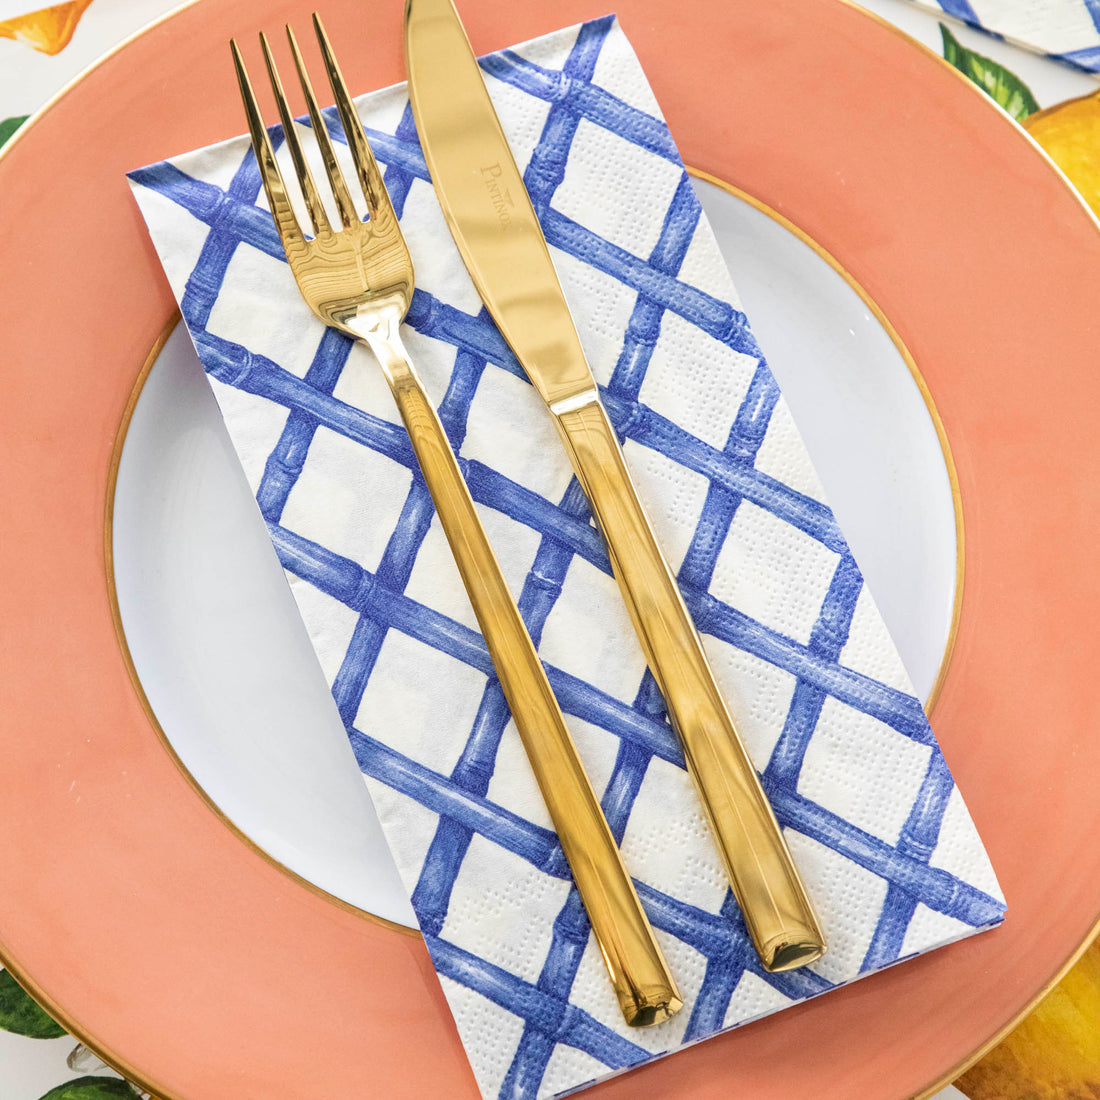 Close-up of a plate with a Blue Lattice Guest Napkin on it with a gold fork and knife on top.